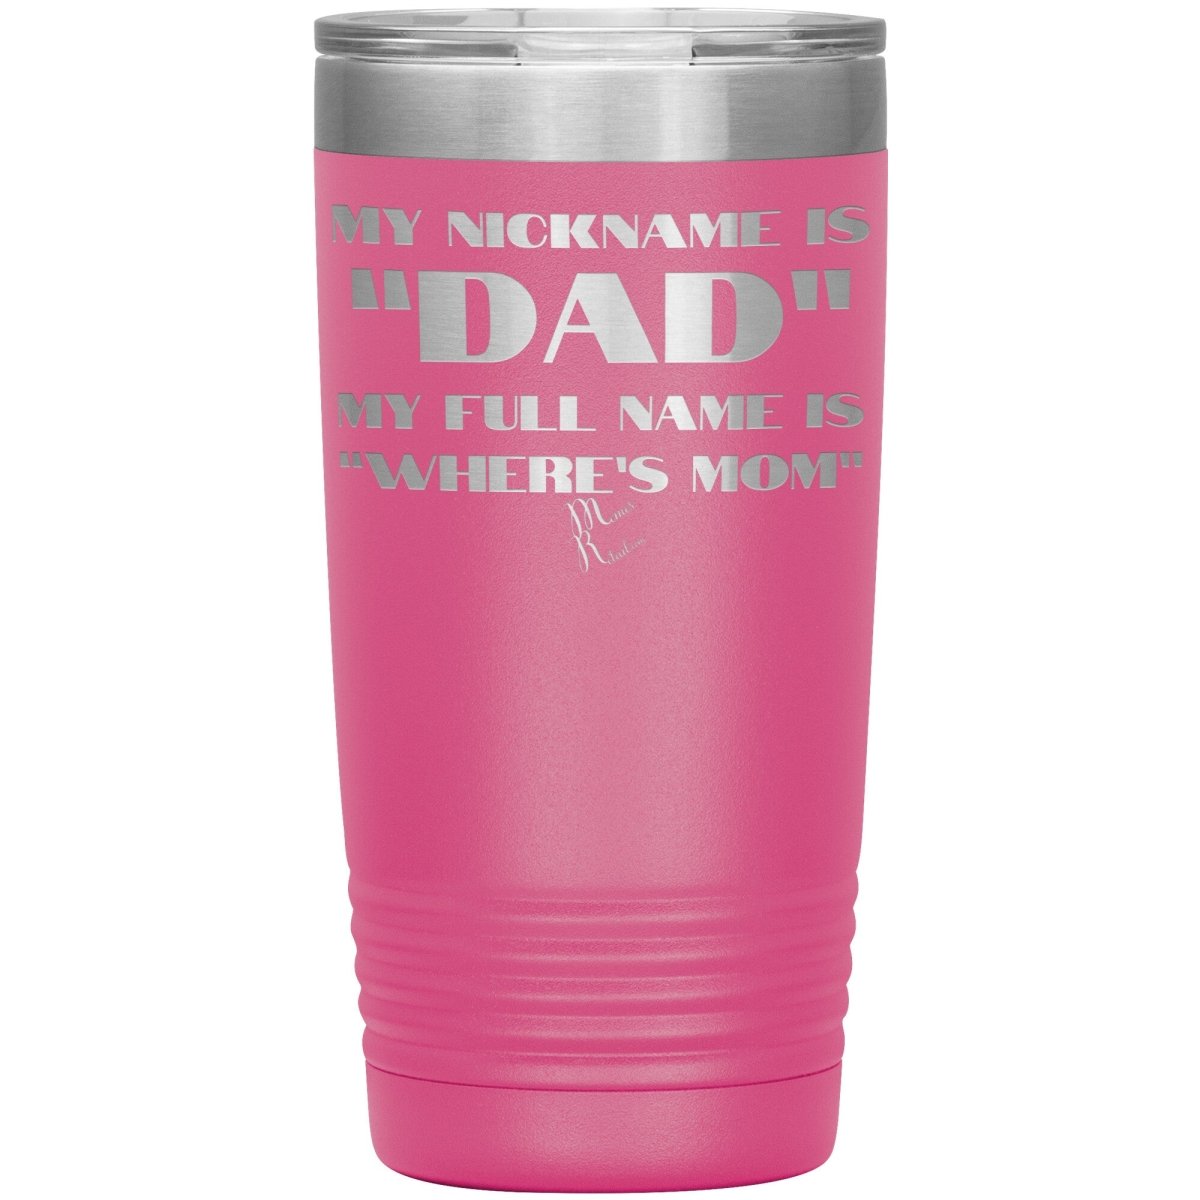 My Nickname is "Dad", My Full Name is "Where's Mom" Tumblers, 20oz Insulated Tumbler / Pink - MemesRetail.com